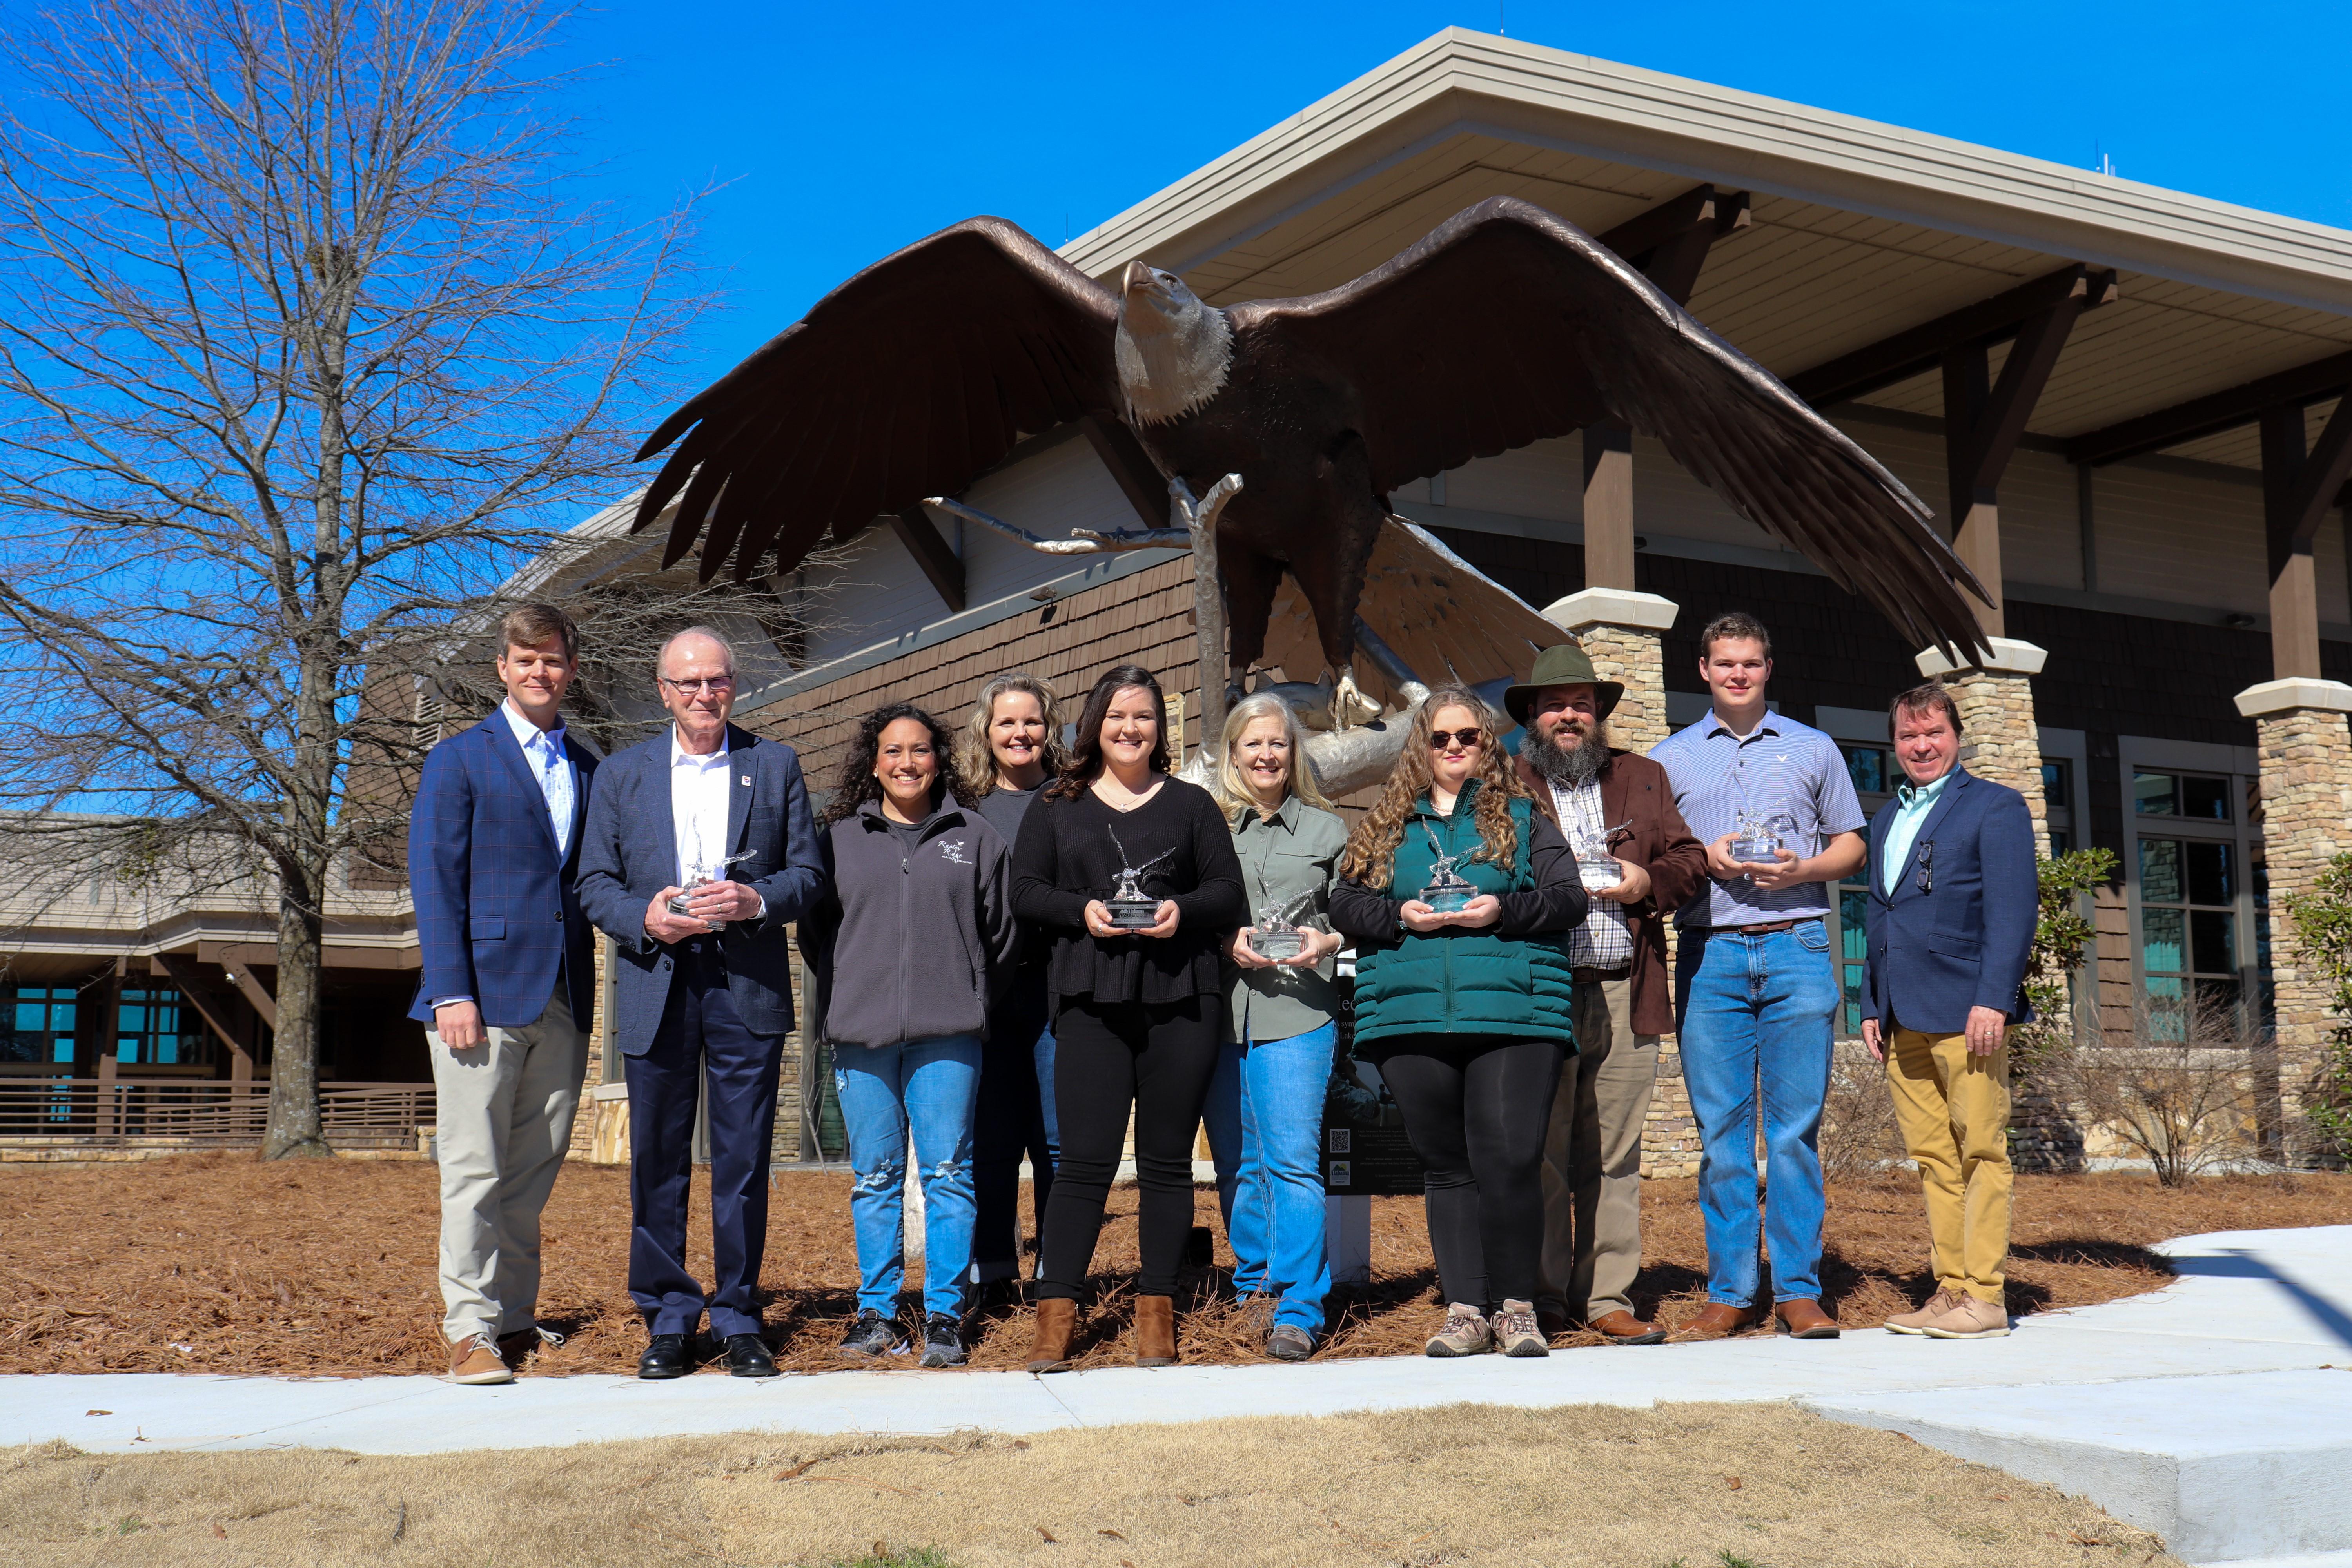 Alabama State Park Eagle Award Winners pose with trophies in front of eagle statue at Lake Guntersville State Park. The eagle statue is named Legacy.